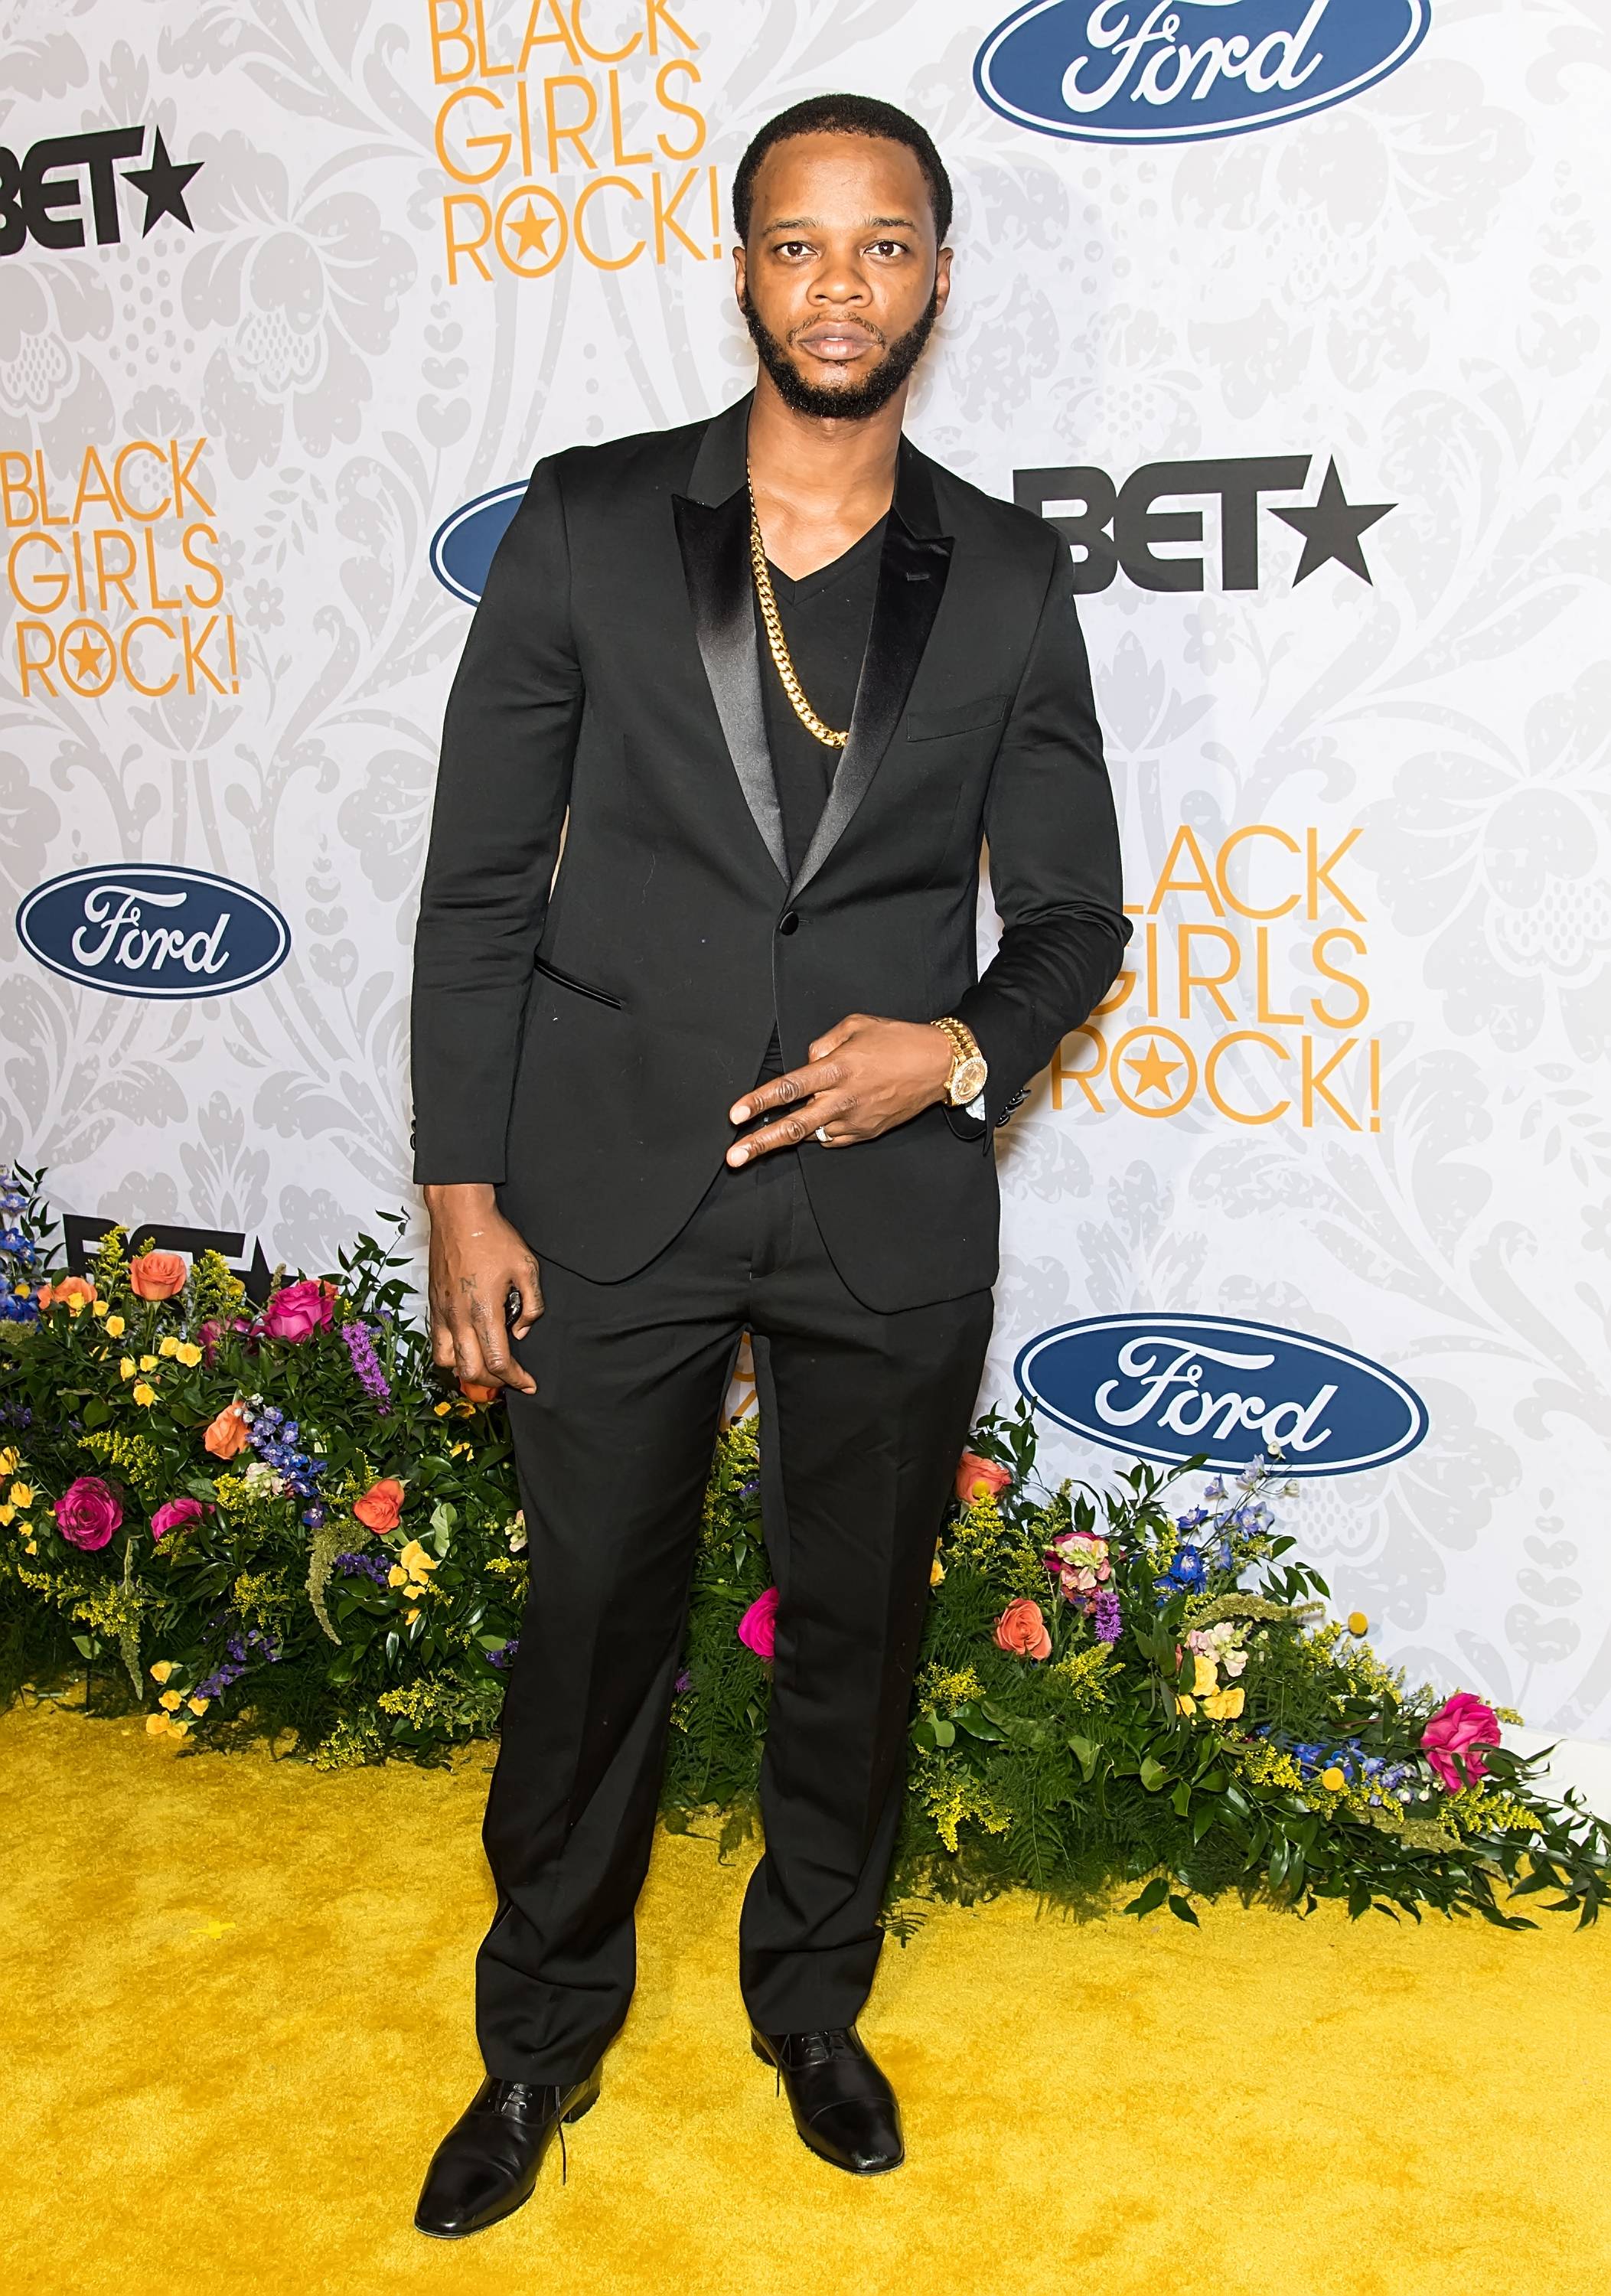 NEWARK, NJ - AUGUST 25:  Papoose attends 2019 Black Girls Rock! at NJ Performing Arts Center on August 25, 2019 in Newark, New Jersey.  (Photo by Gilbert Carrasquillo/Getty Images)